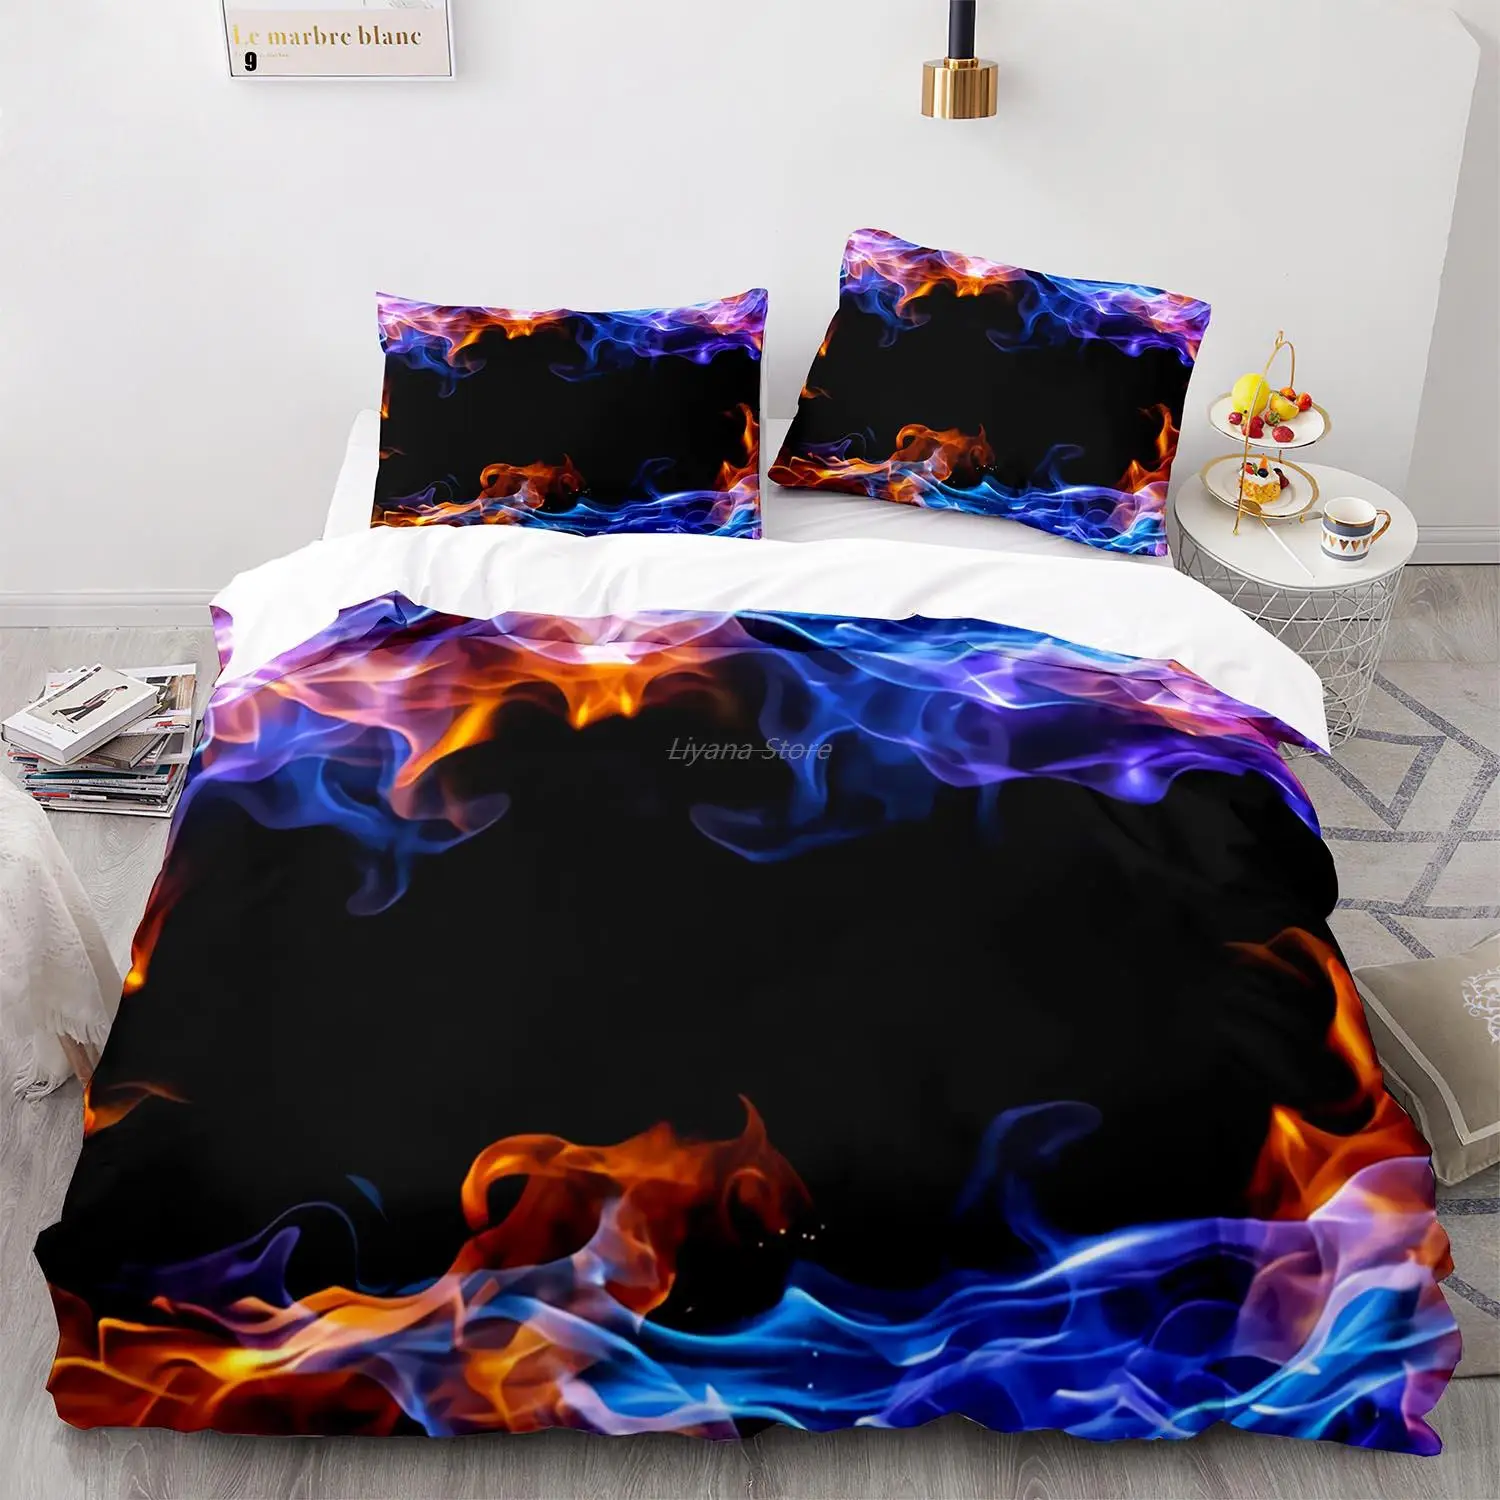 

Colorful Flame Bedding Set Twin Full Queen King Size Ice And Fire Blaze Bed Set Children Kid Bedroom Duvet Cover sets 009